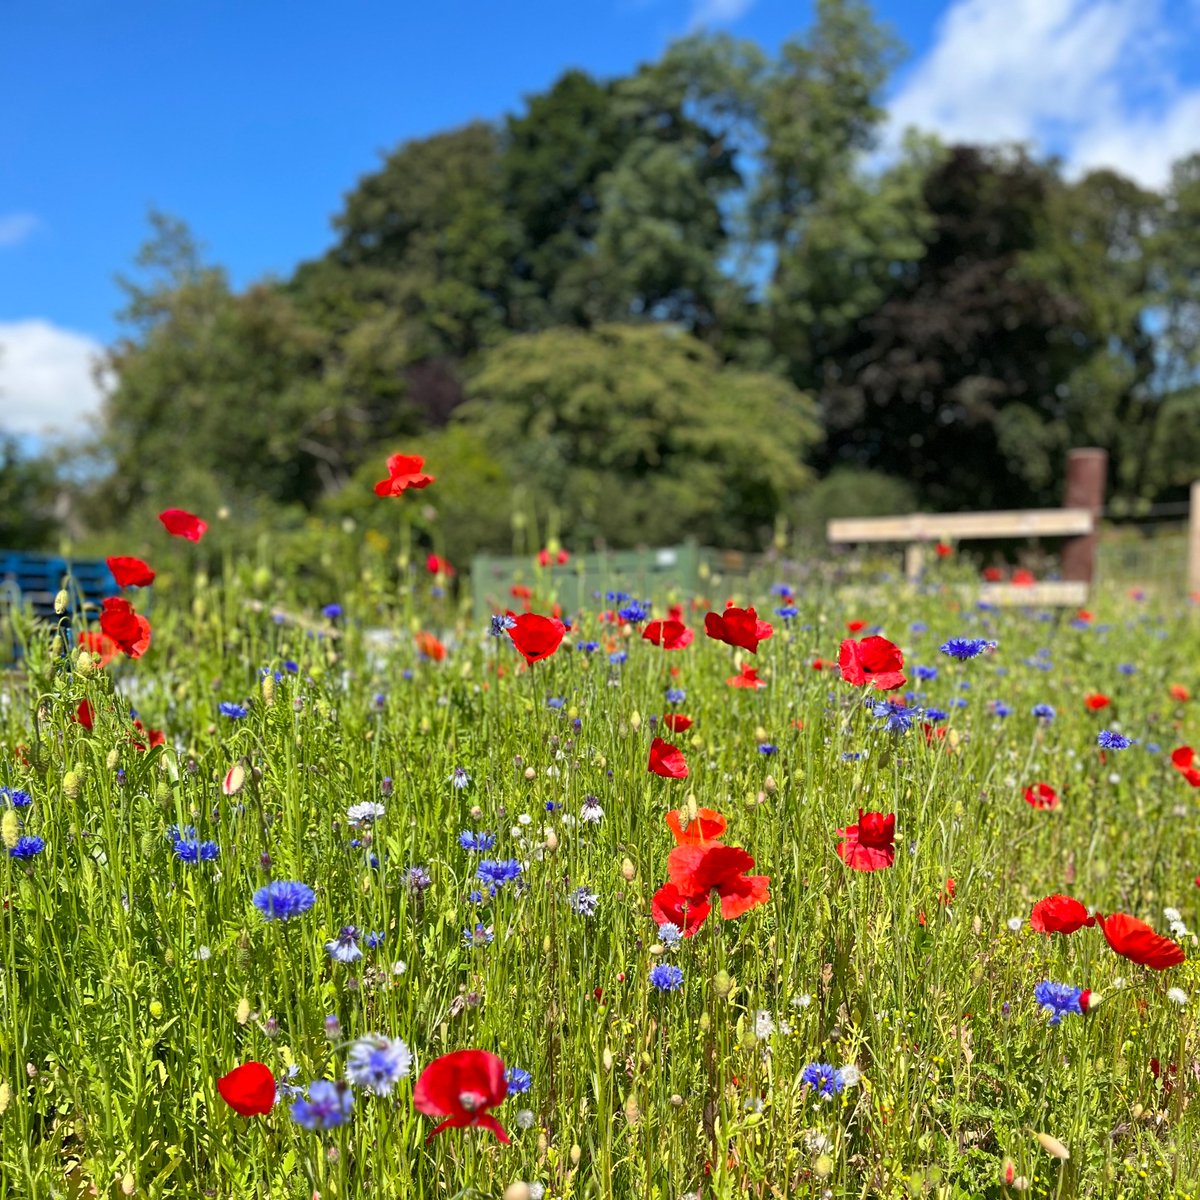 🐝 Today is World Bee Day 🐝

We continue our efforts to promote biodiversity on the farm by preparing our wild flowers to bloom again this summer. We look forward to brining a pop of colour to the farm!

#WorldBeeDay #Biodiversity #Sustainability